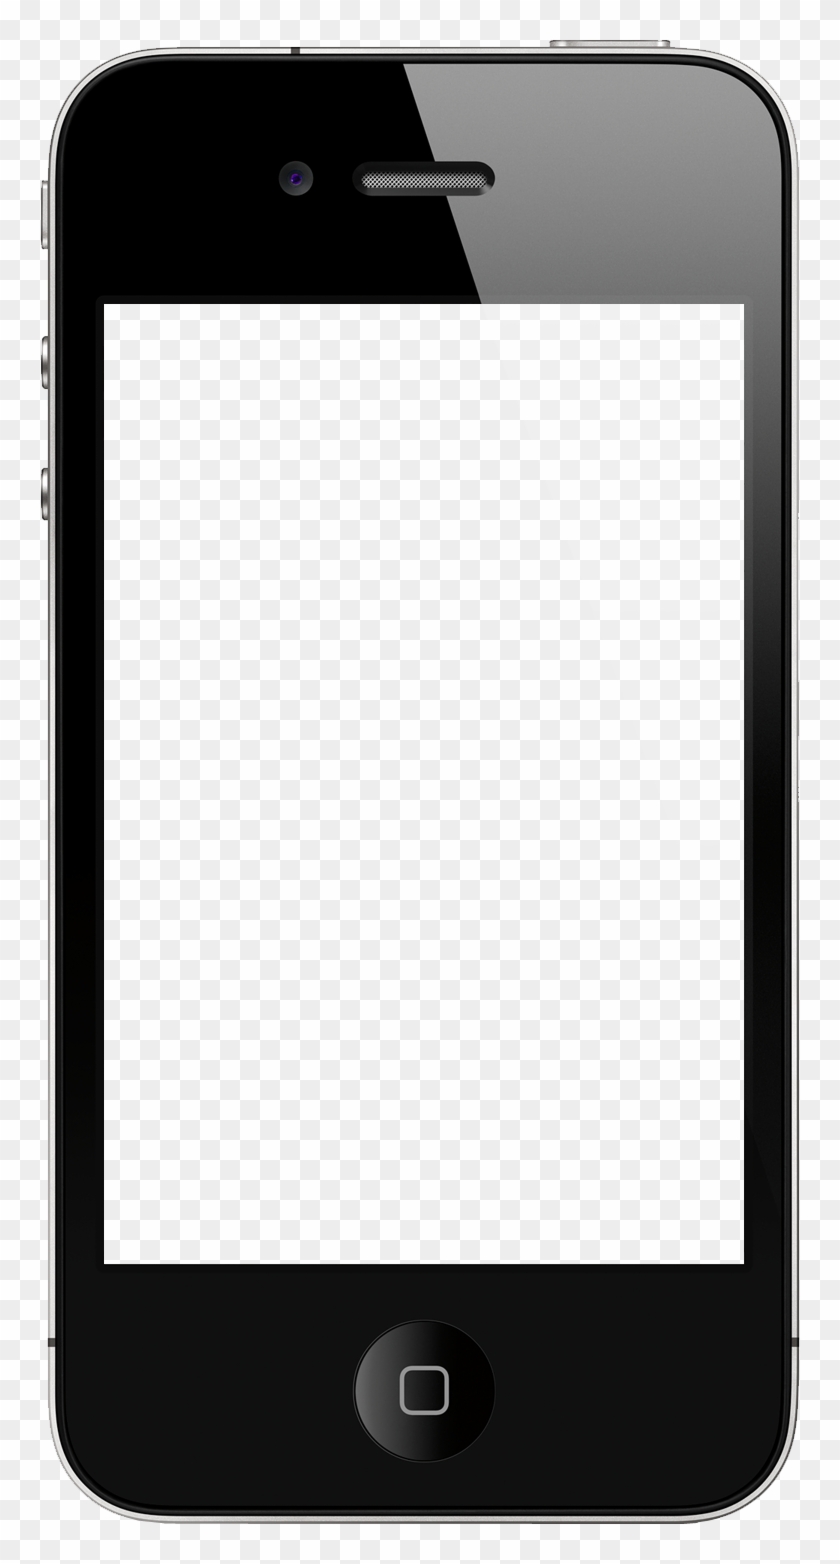 Iphone Template Empty - Iphone Png No Background #1021725